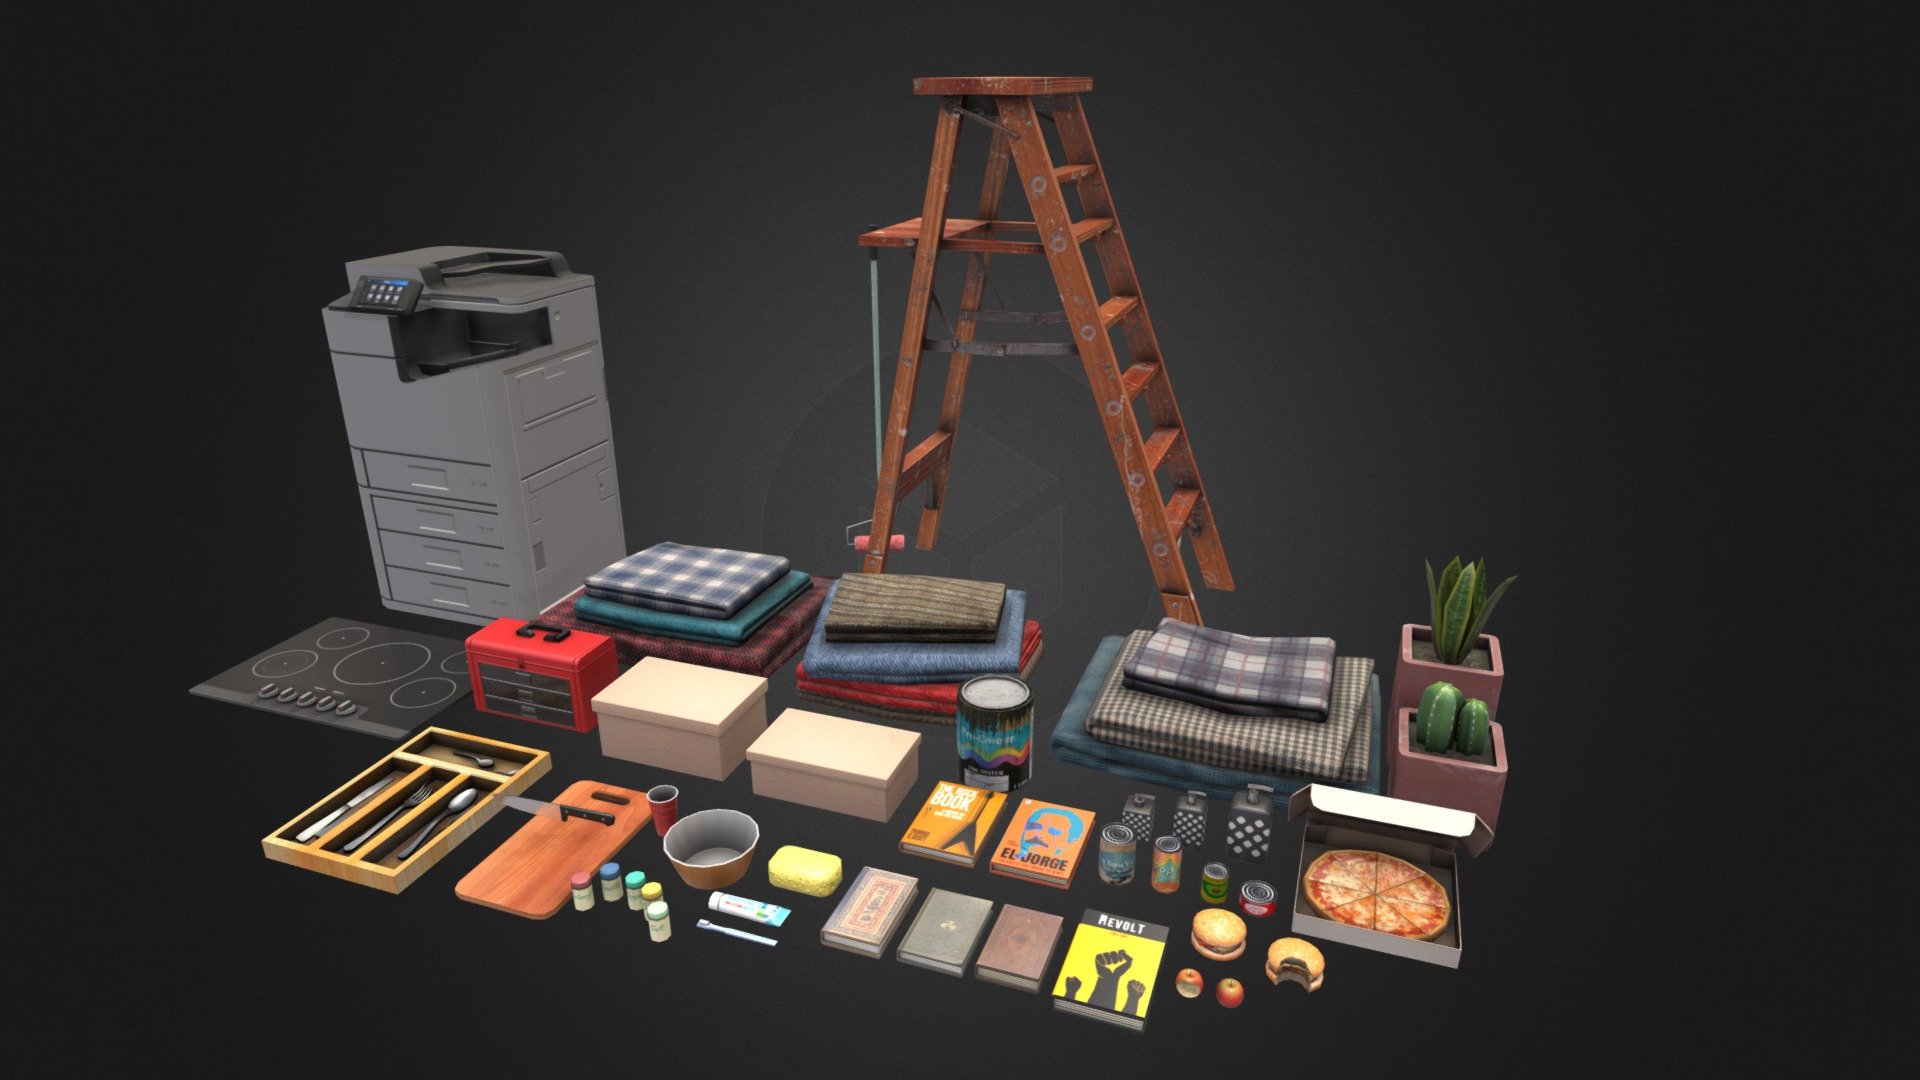 This is a pack of household/office props I modeled for a VR title called BraveR. 

Link to the game: https://www.oculus.com/experiences/quest/5565807970104952/

Software used: 
Blender, Substance Painter  

Textures: 2K - VR ready household props - 3D model by Grish_Avetisyan 3d model